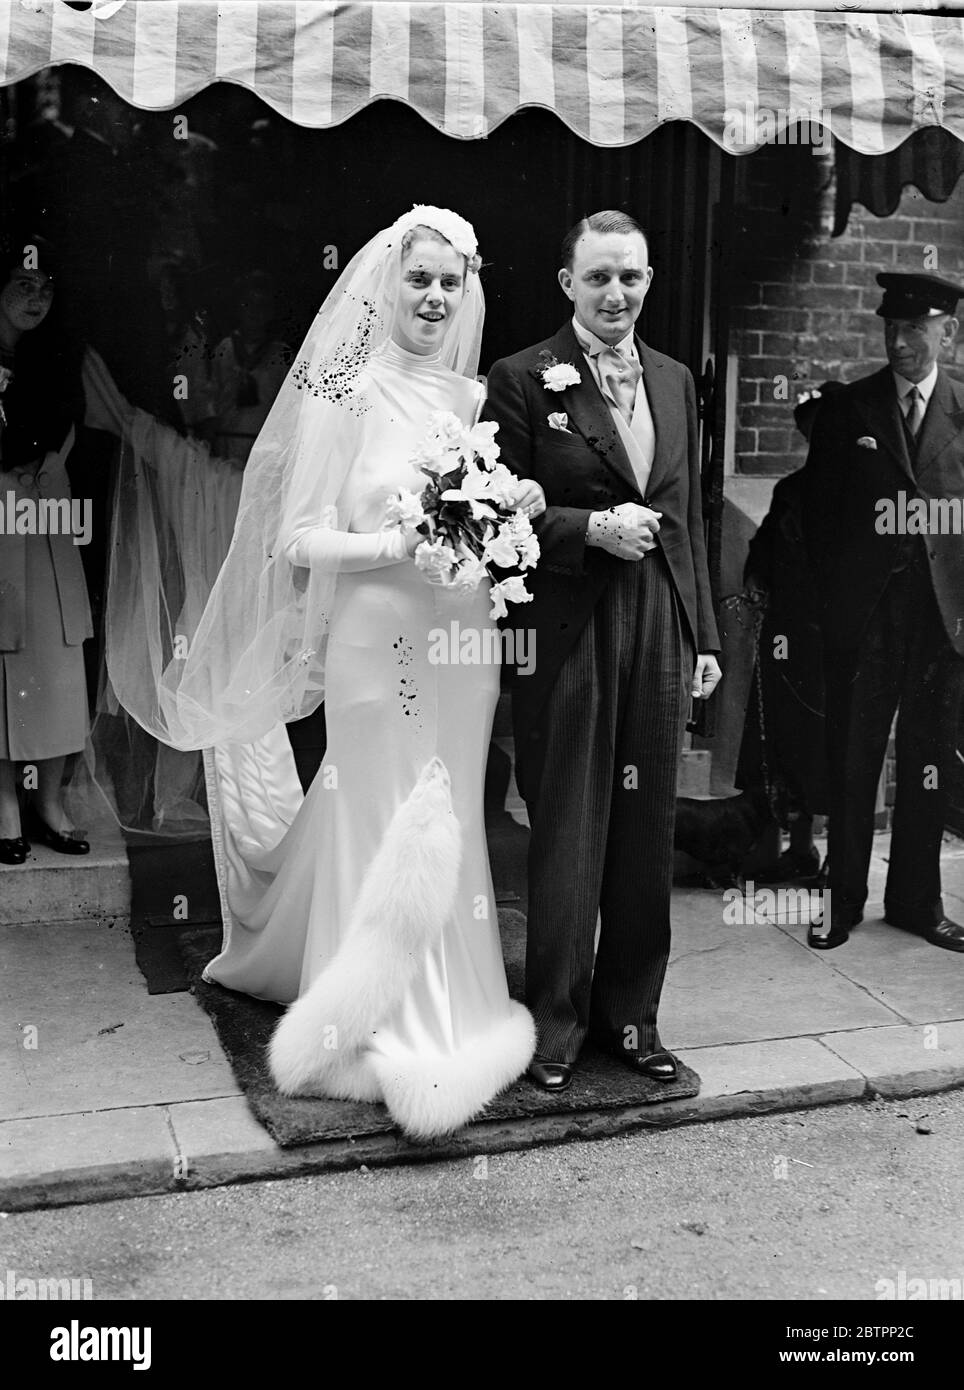 Brides fur trimmed dress. The wedding of Mr John William Banks of Pinchbeck, Spalding, Lincolnshire, and Miss Olwyn Delmar Middleton of Ealing took place at Holy Trinity Church, Brompton. Photo shows, the bride in a wedding dress edged with white fur, leaving with the bridegroom after the ceremony. 24 September 1938 Stock Photo